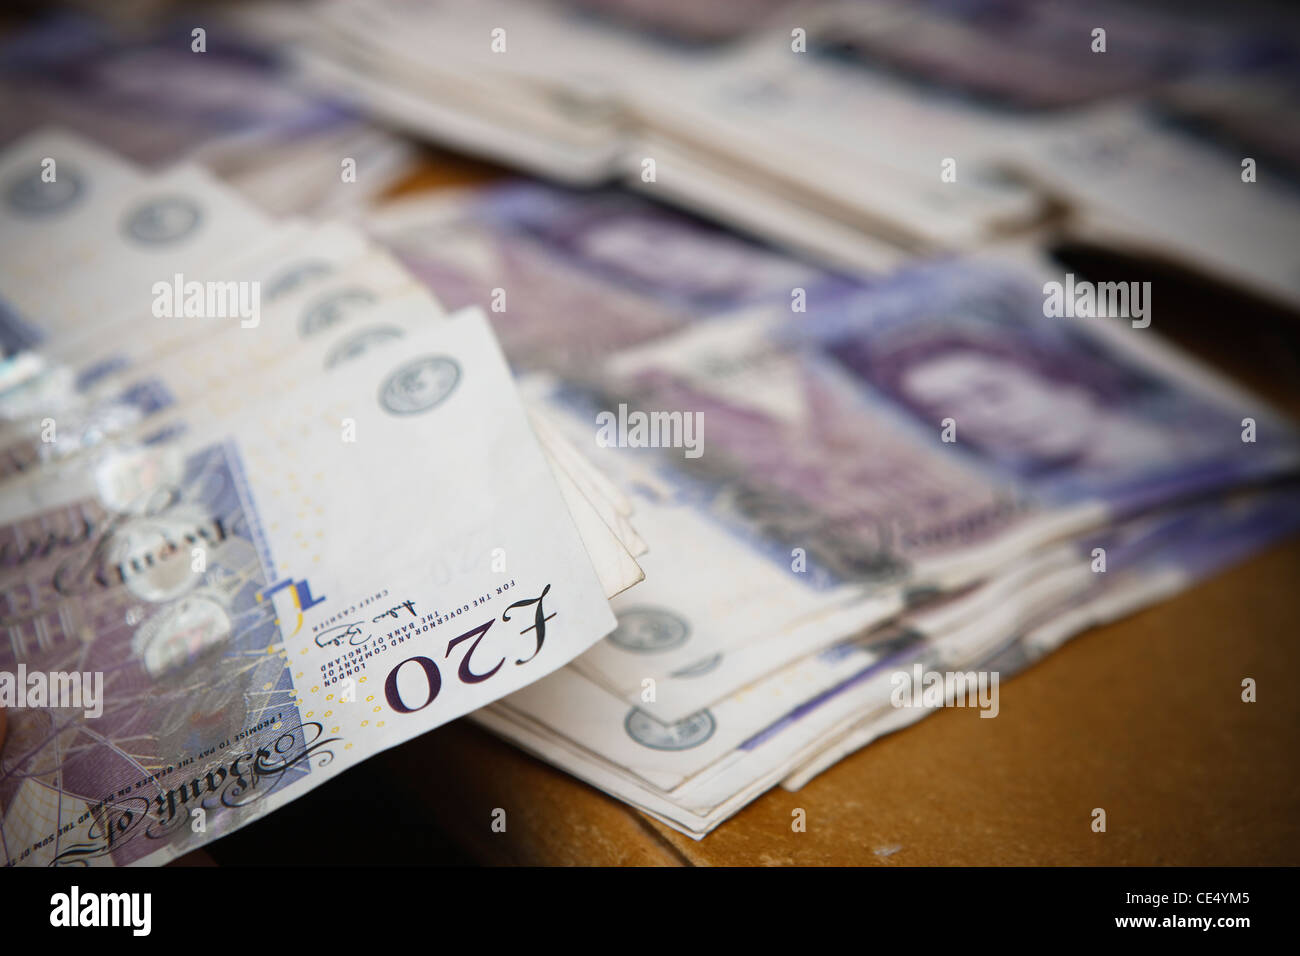 Counting money fan £20 notes GBR sterling currency desk view landscape piles Stock Photo